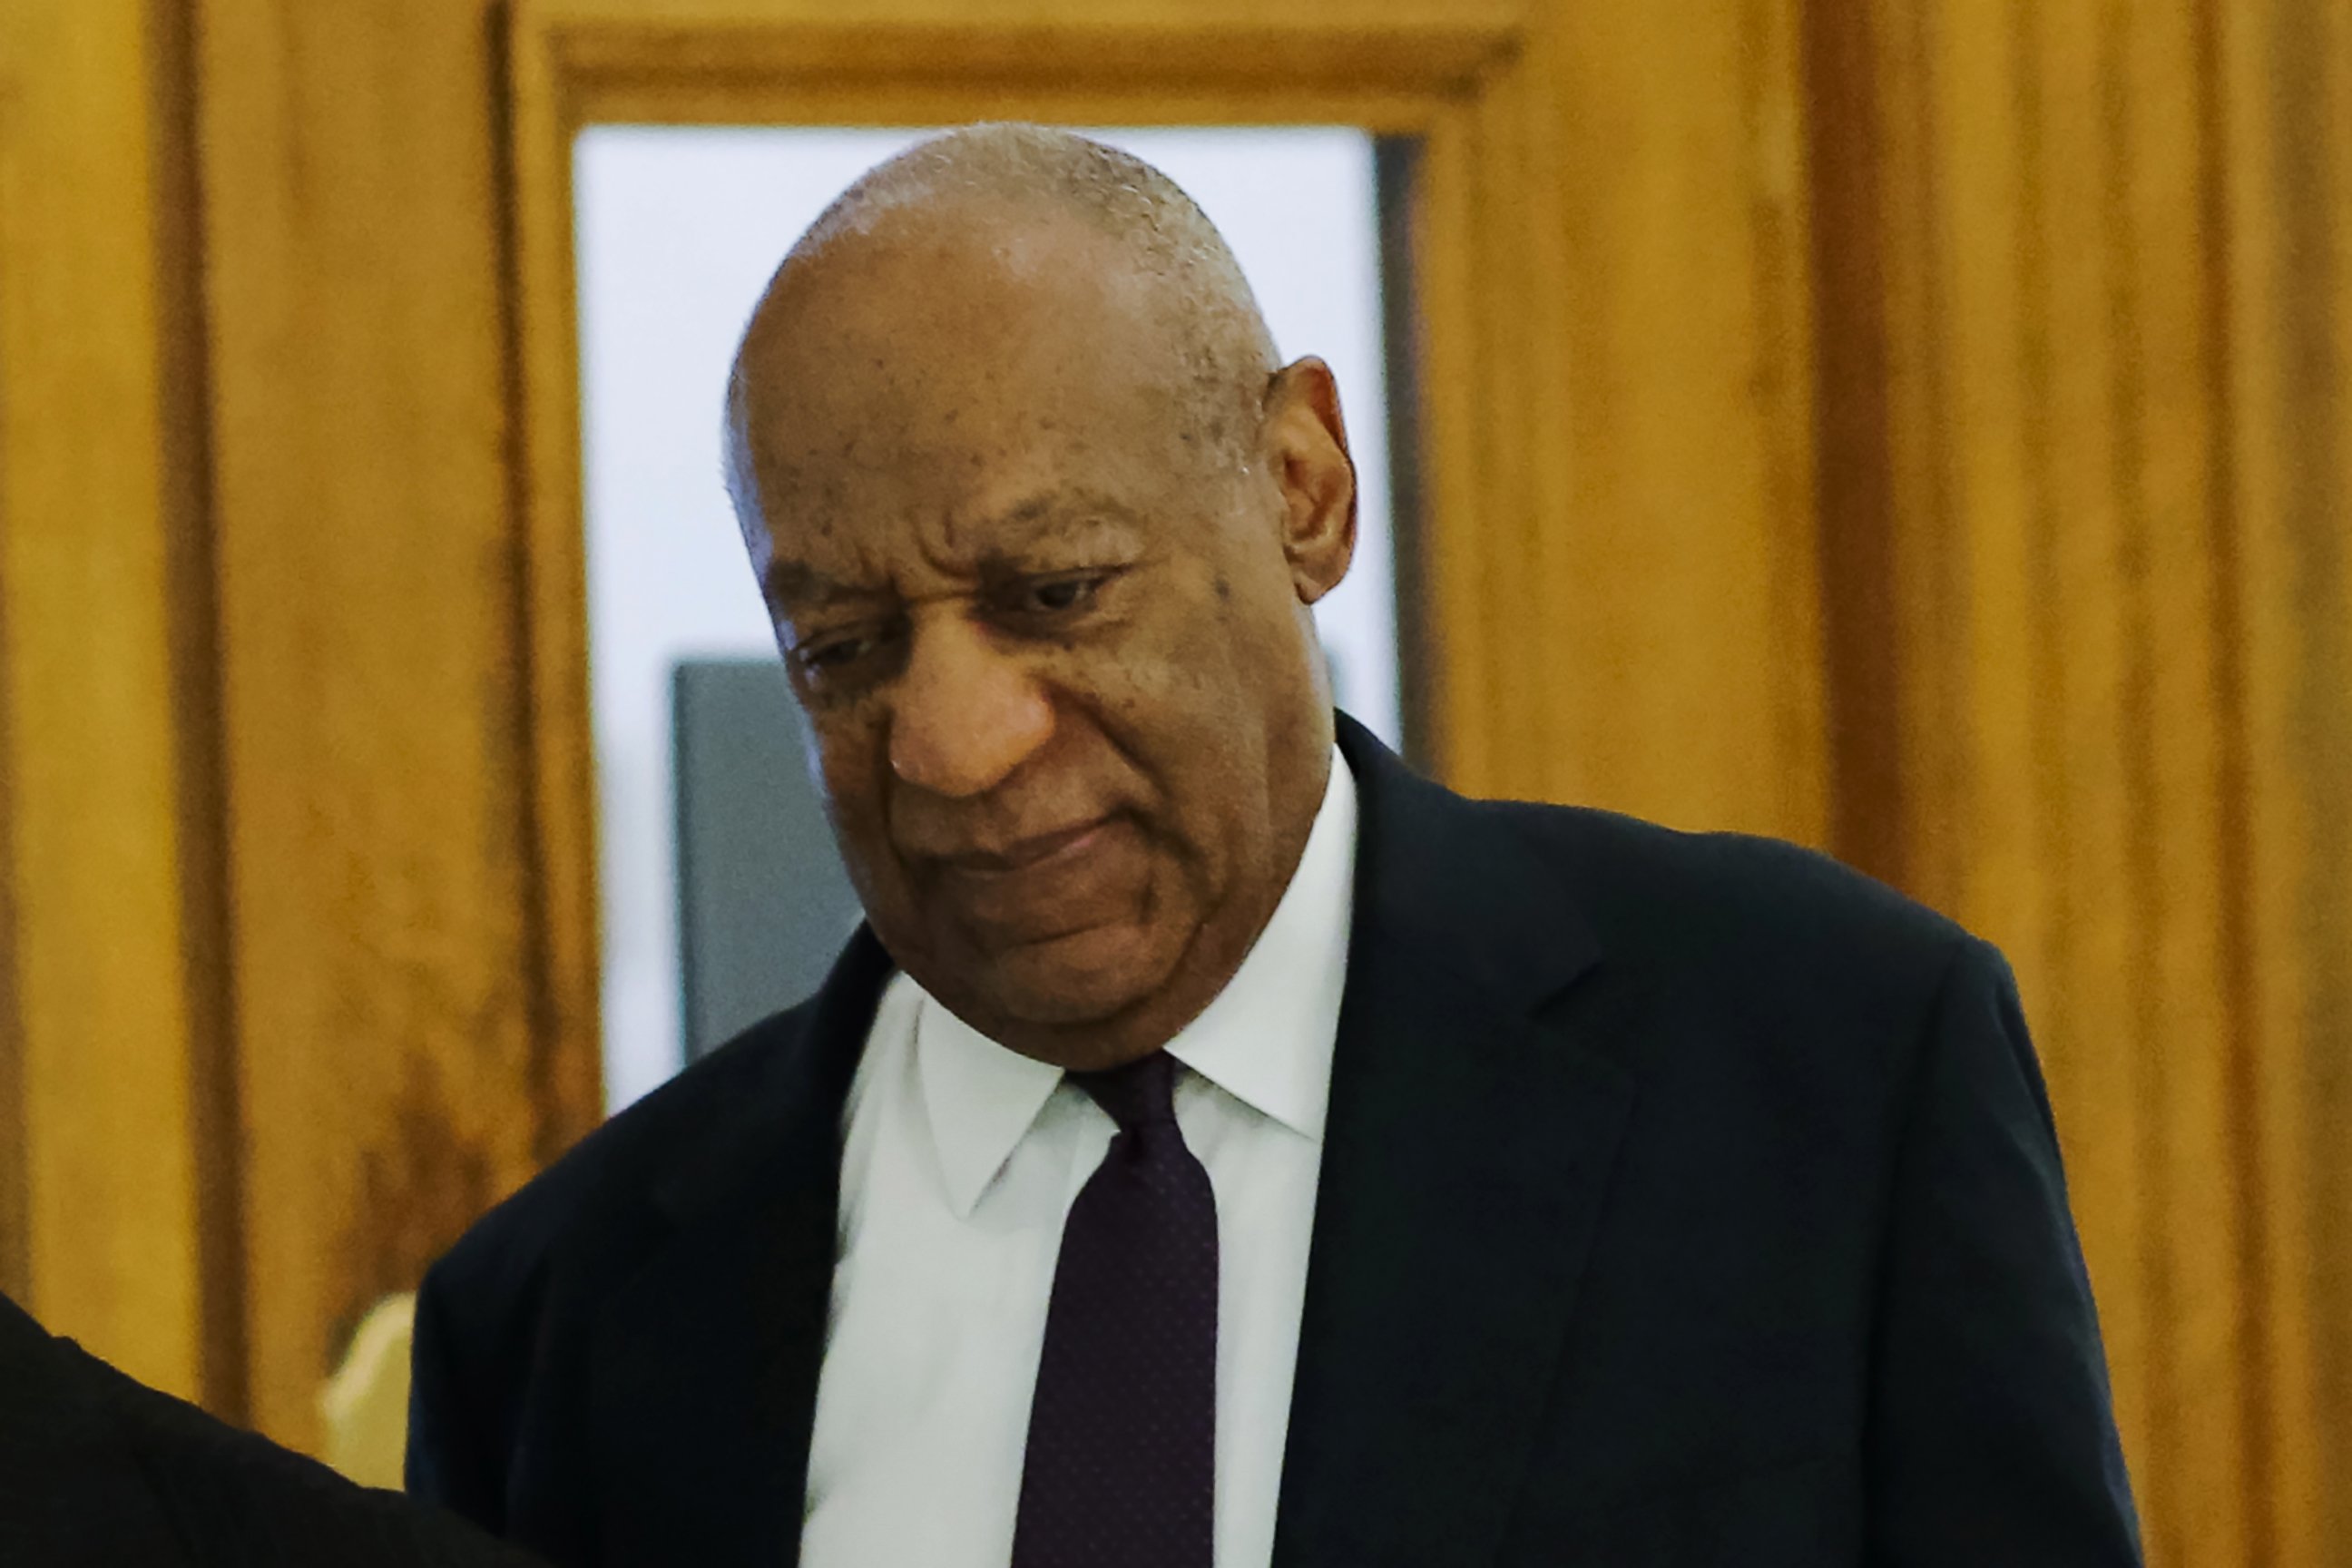 PHOTO: Bill Cosby arrives for his trial on sexual assault charges at the Montgomery County Courthouse, June 6, 2017, in Norristown, Pa.